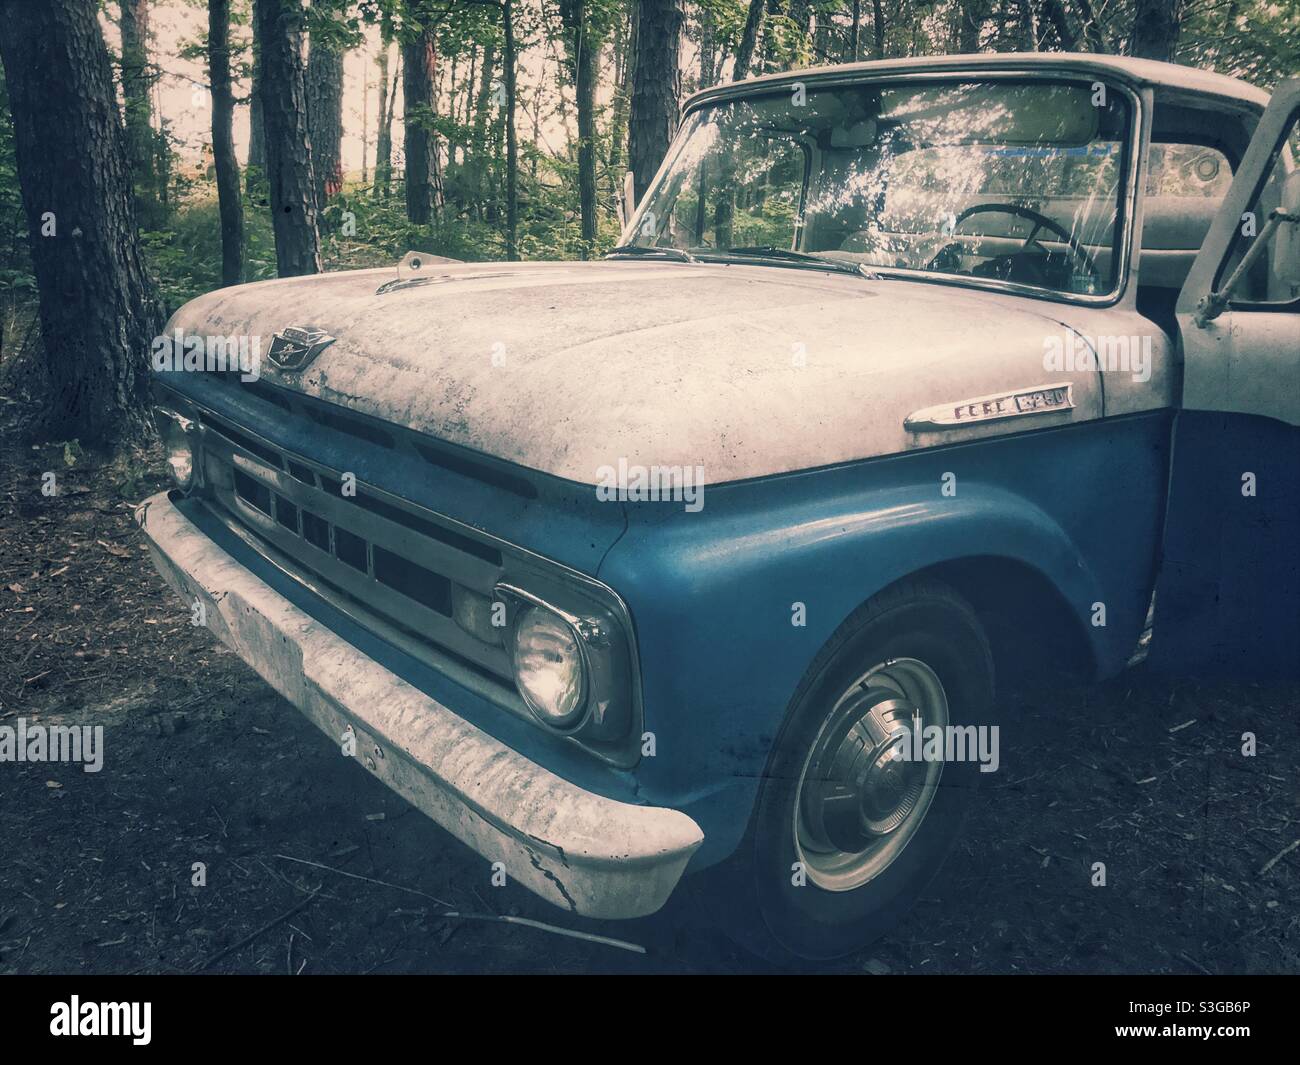 Vintage 60s Ford F-250 in blue and white, 3/4 view Stock Photo